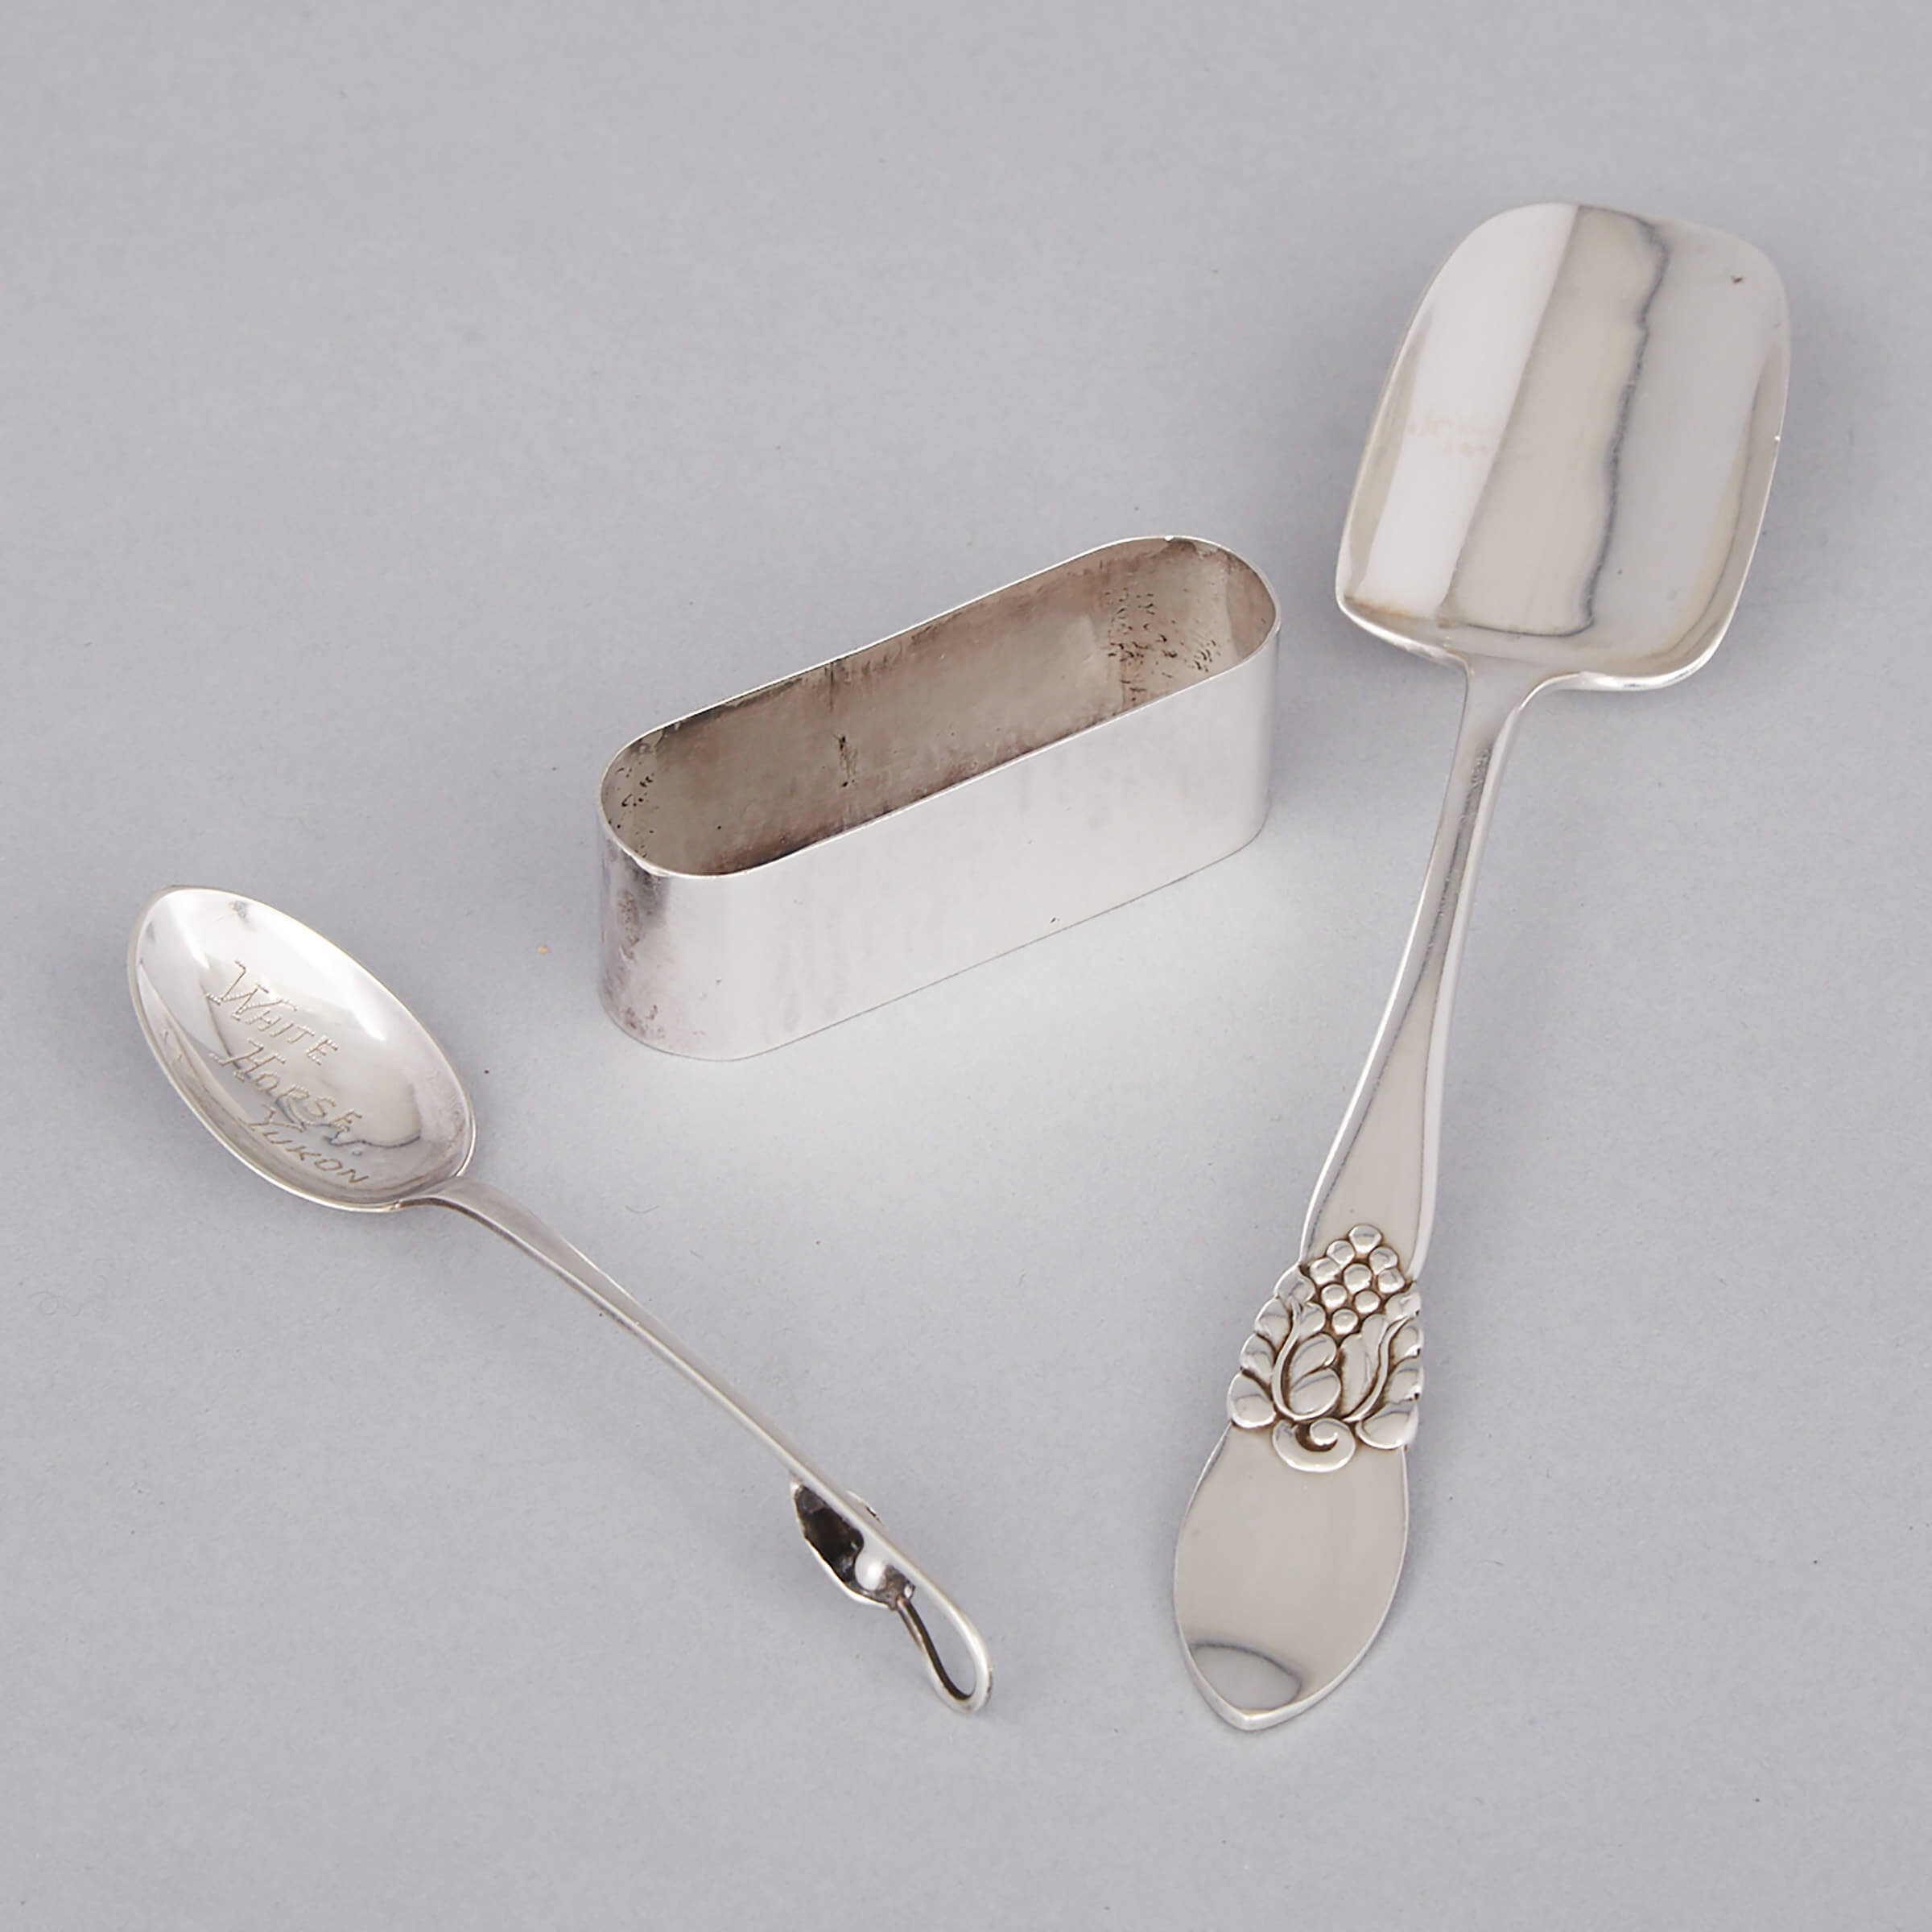 Canadian Silver Cheese Scoop, Souvenir Spoon and a Napkin Ring, Carl Poul Petersen, Montreal, Que., mid-20th century